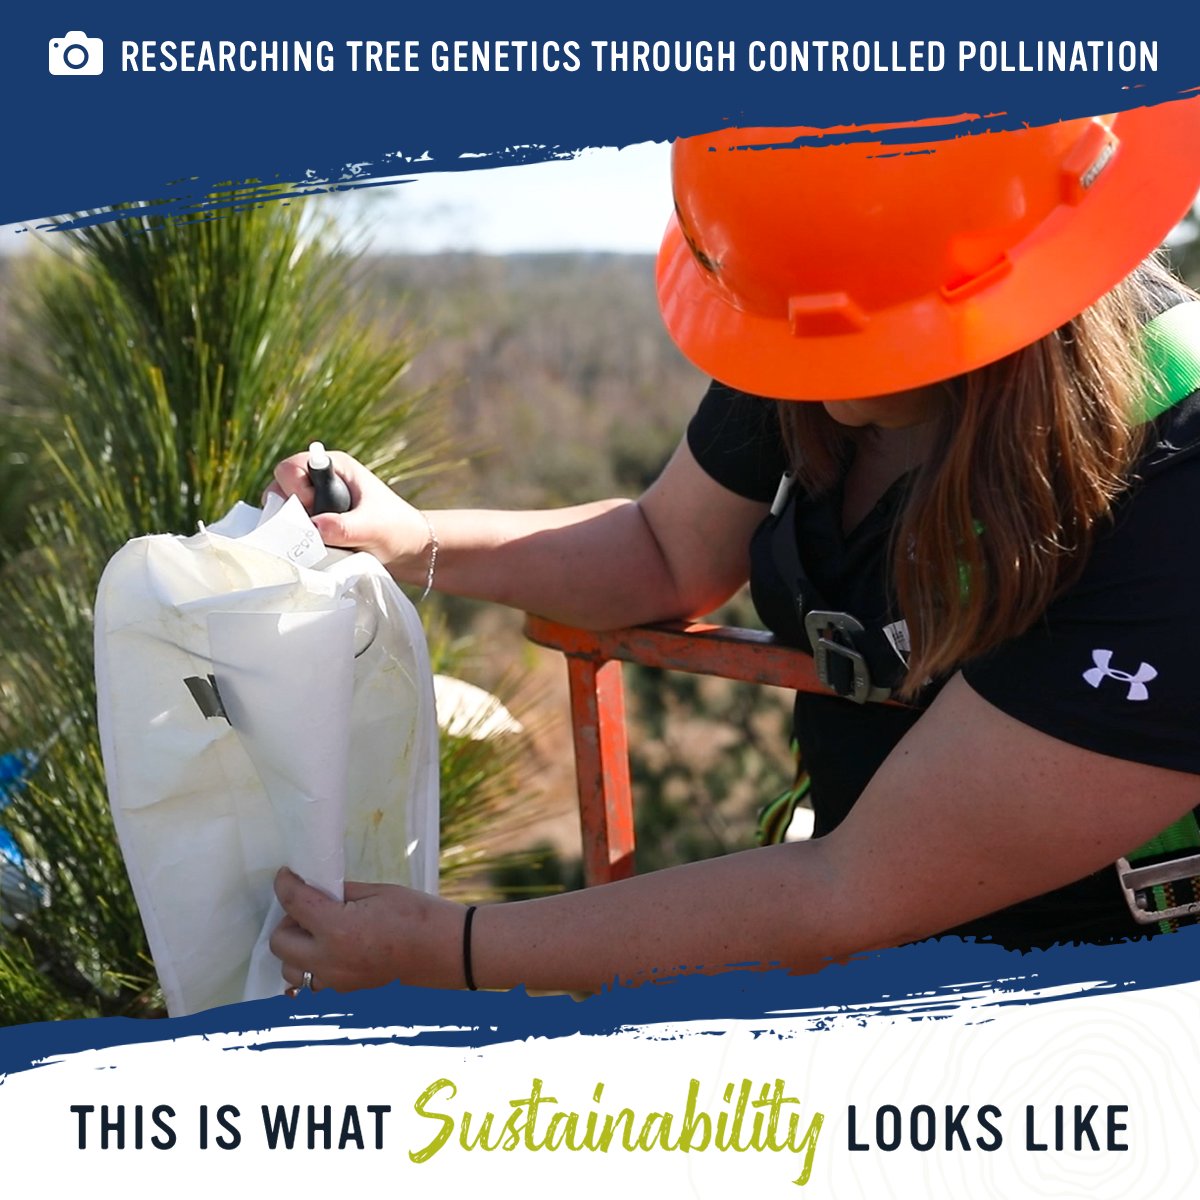 Using controlled pollination to grow trees from our best-performing tree families: #ThisIsWhatSustainabilityLooksLike By researching tree genetics, we ensure the development of more resilient trees for generations to come. Learn more: hubs.ly/Q02qDlxG0